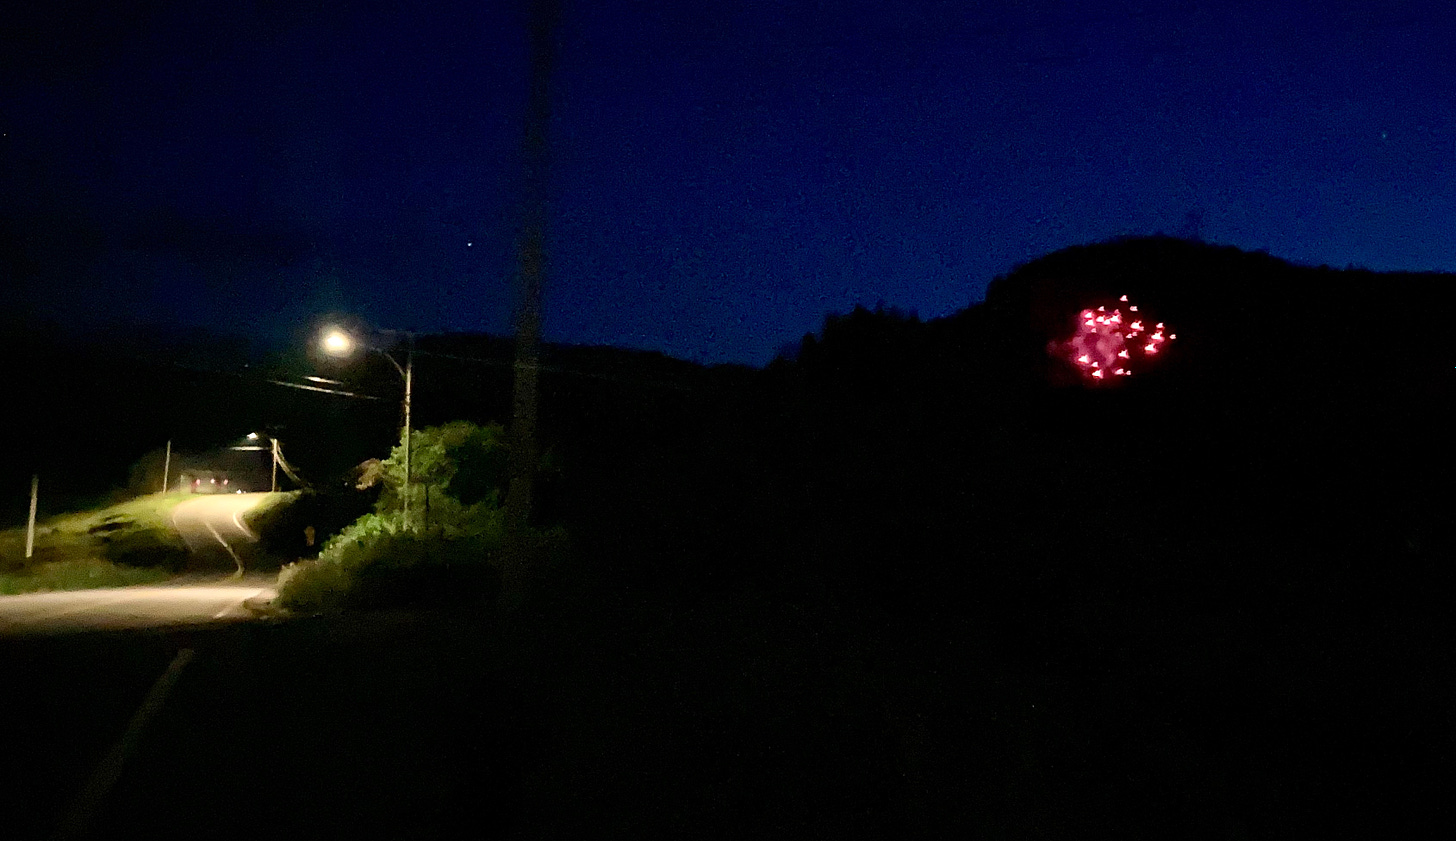 A nighttime picture with a curving road and a streetlamp on the left and a red firework on the right